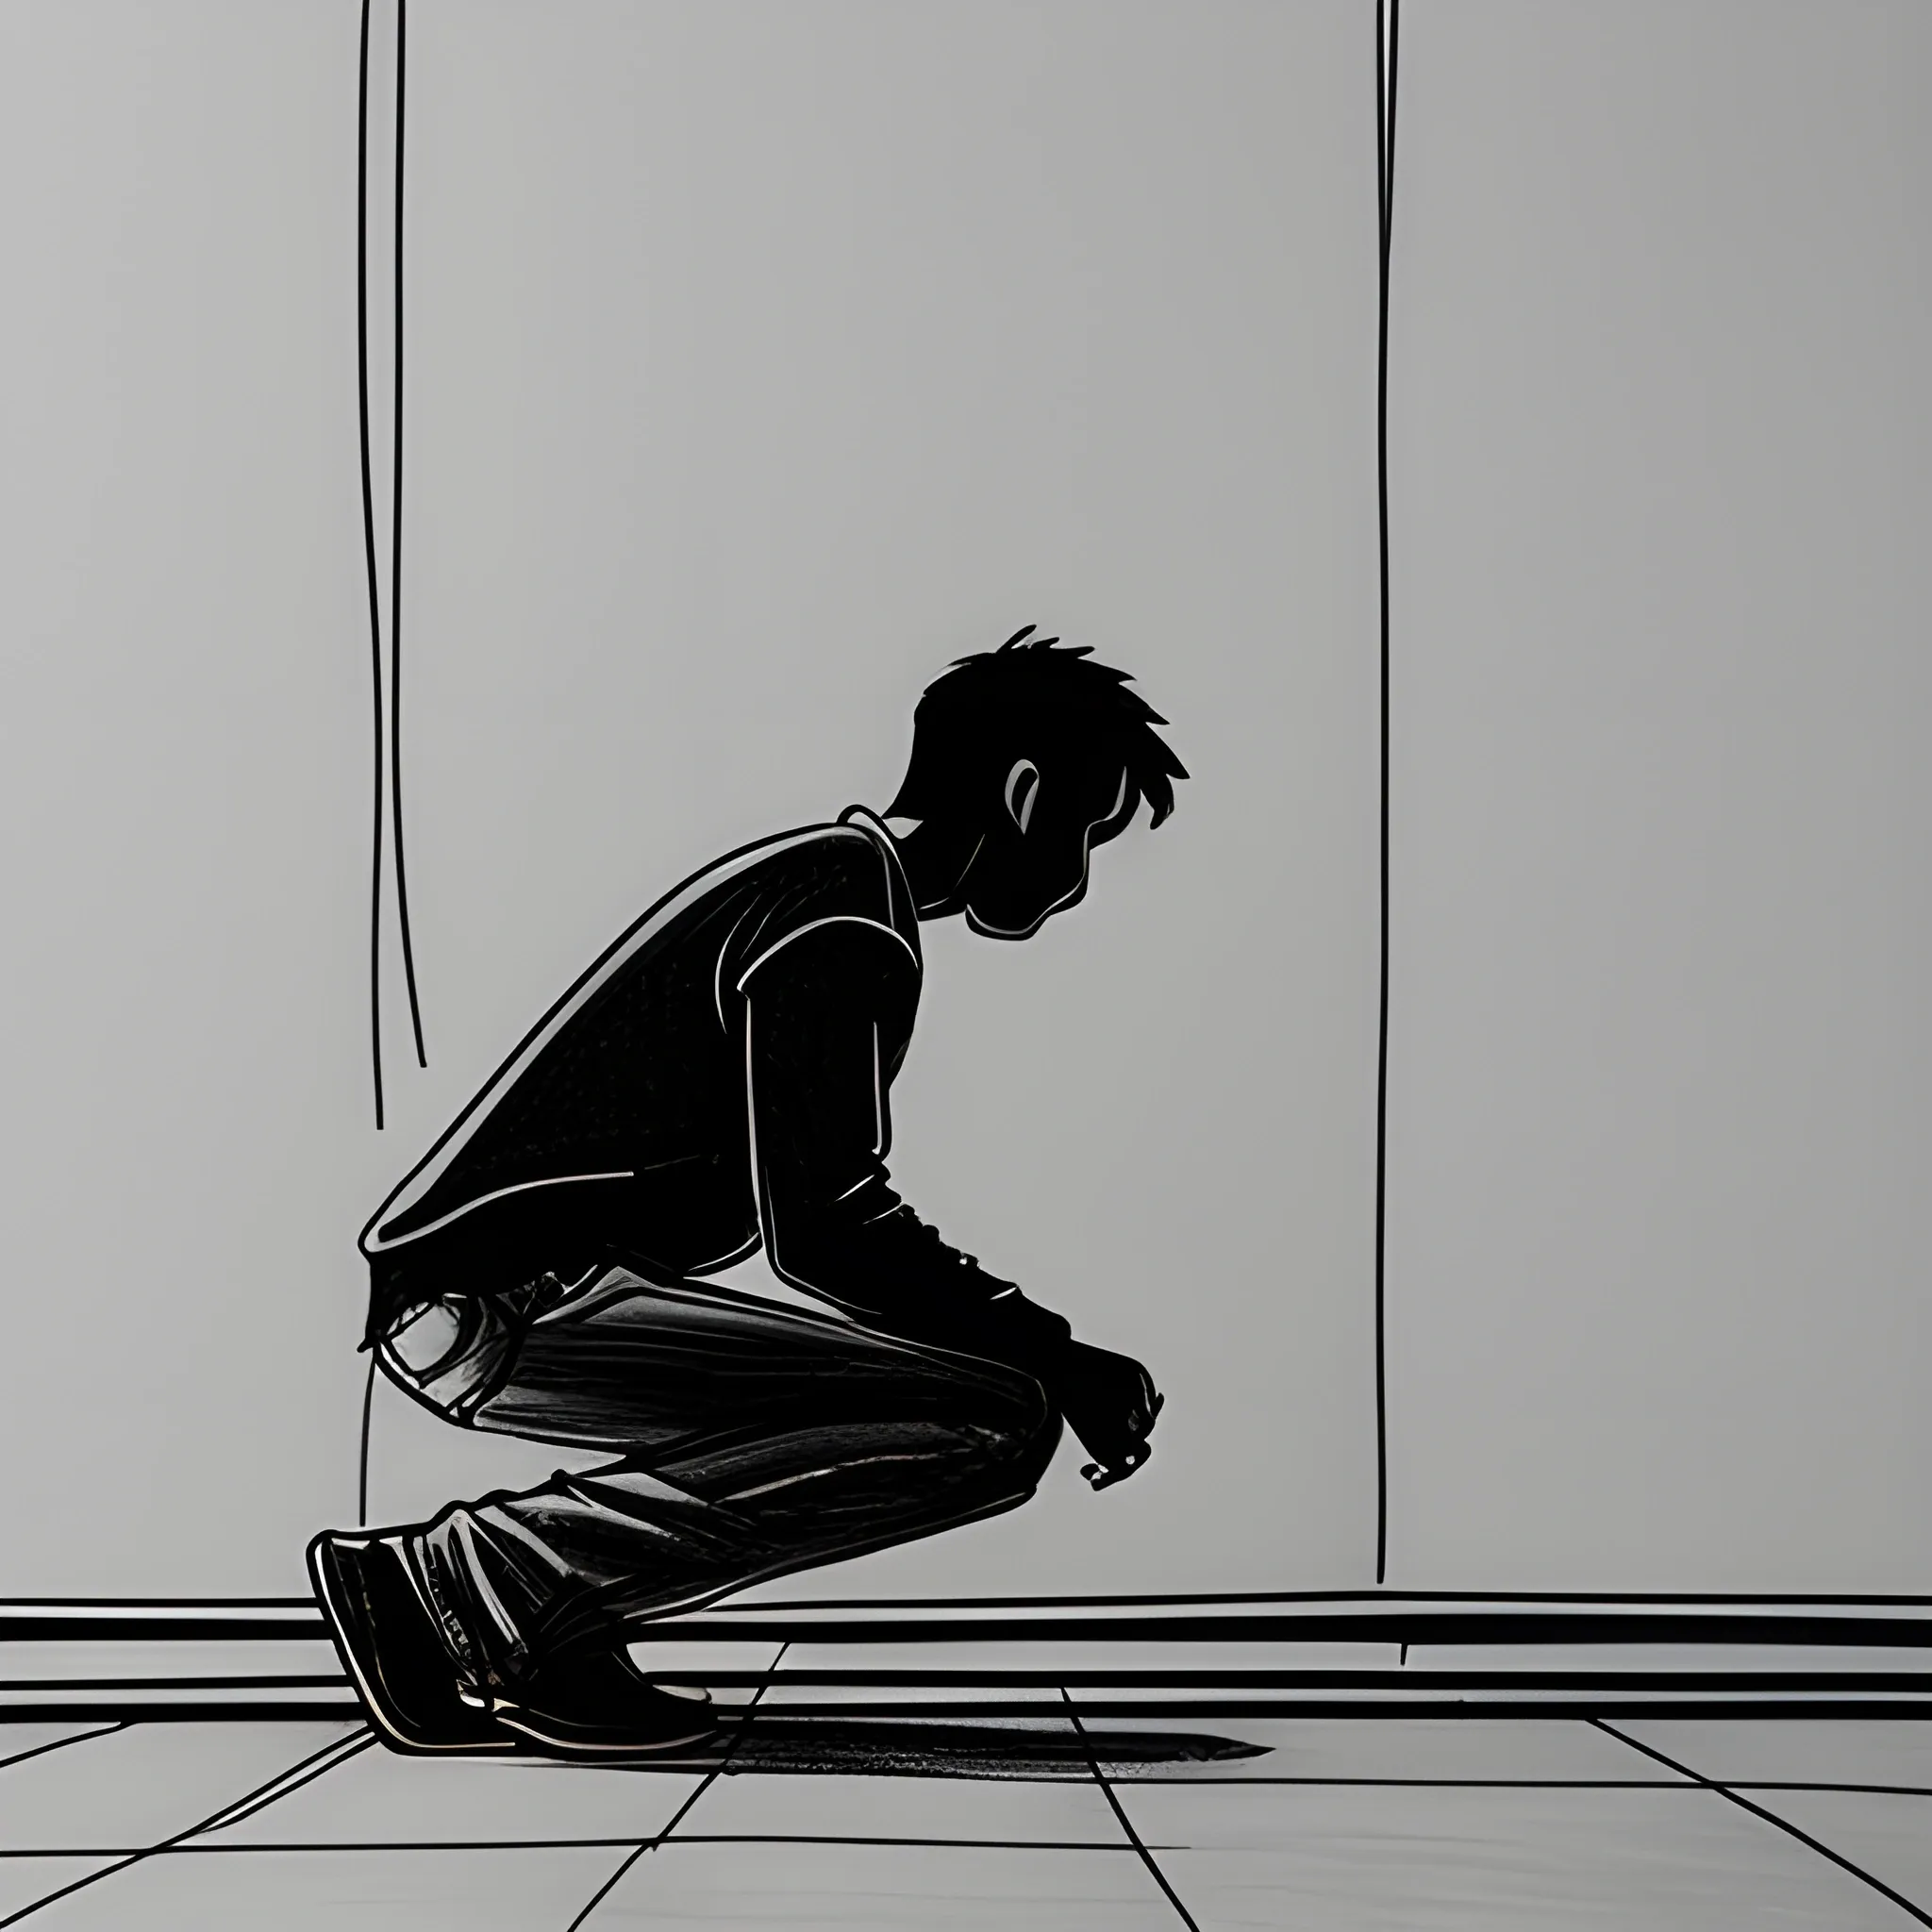 make a drawing of a person leaning on one knee and crouching, waiting to go out while looking at a cover on the wall, this drawing must have a low angle and backlight from the wall